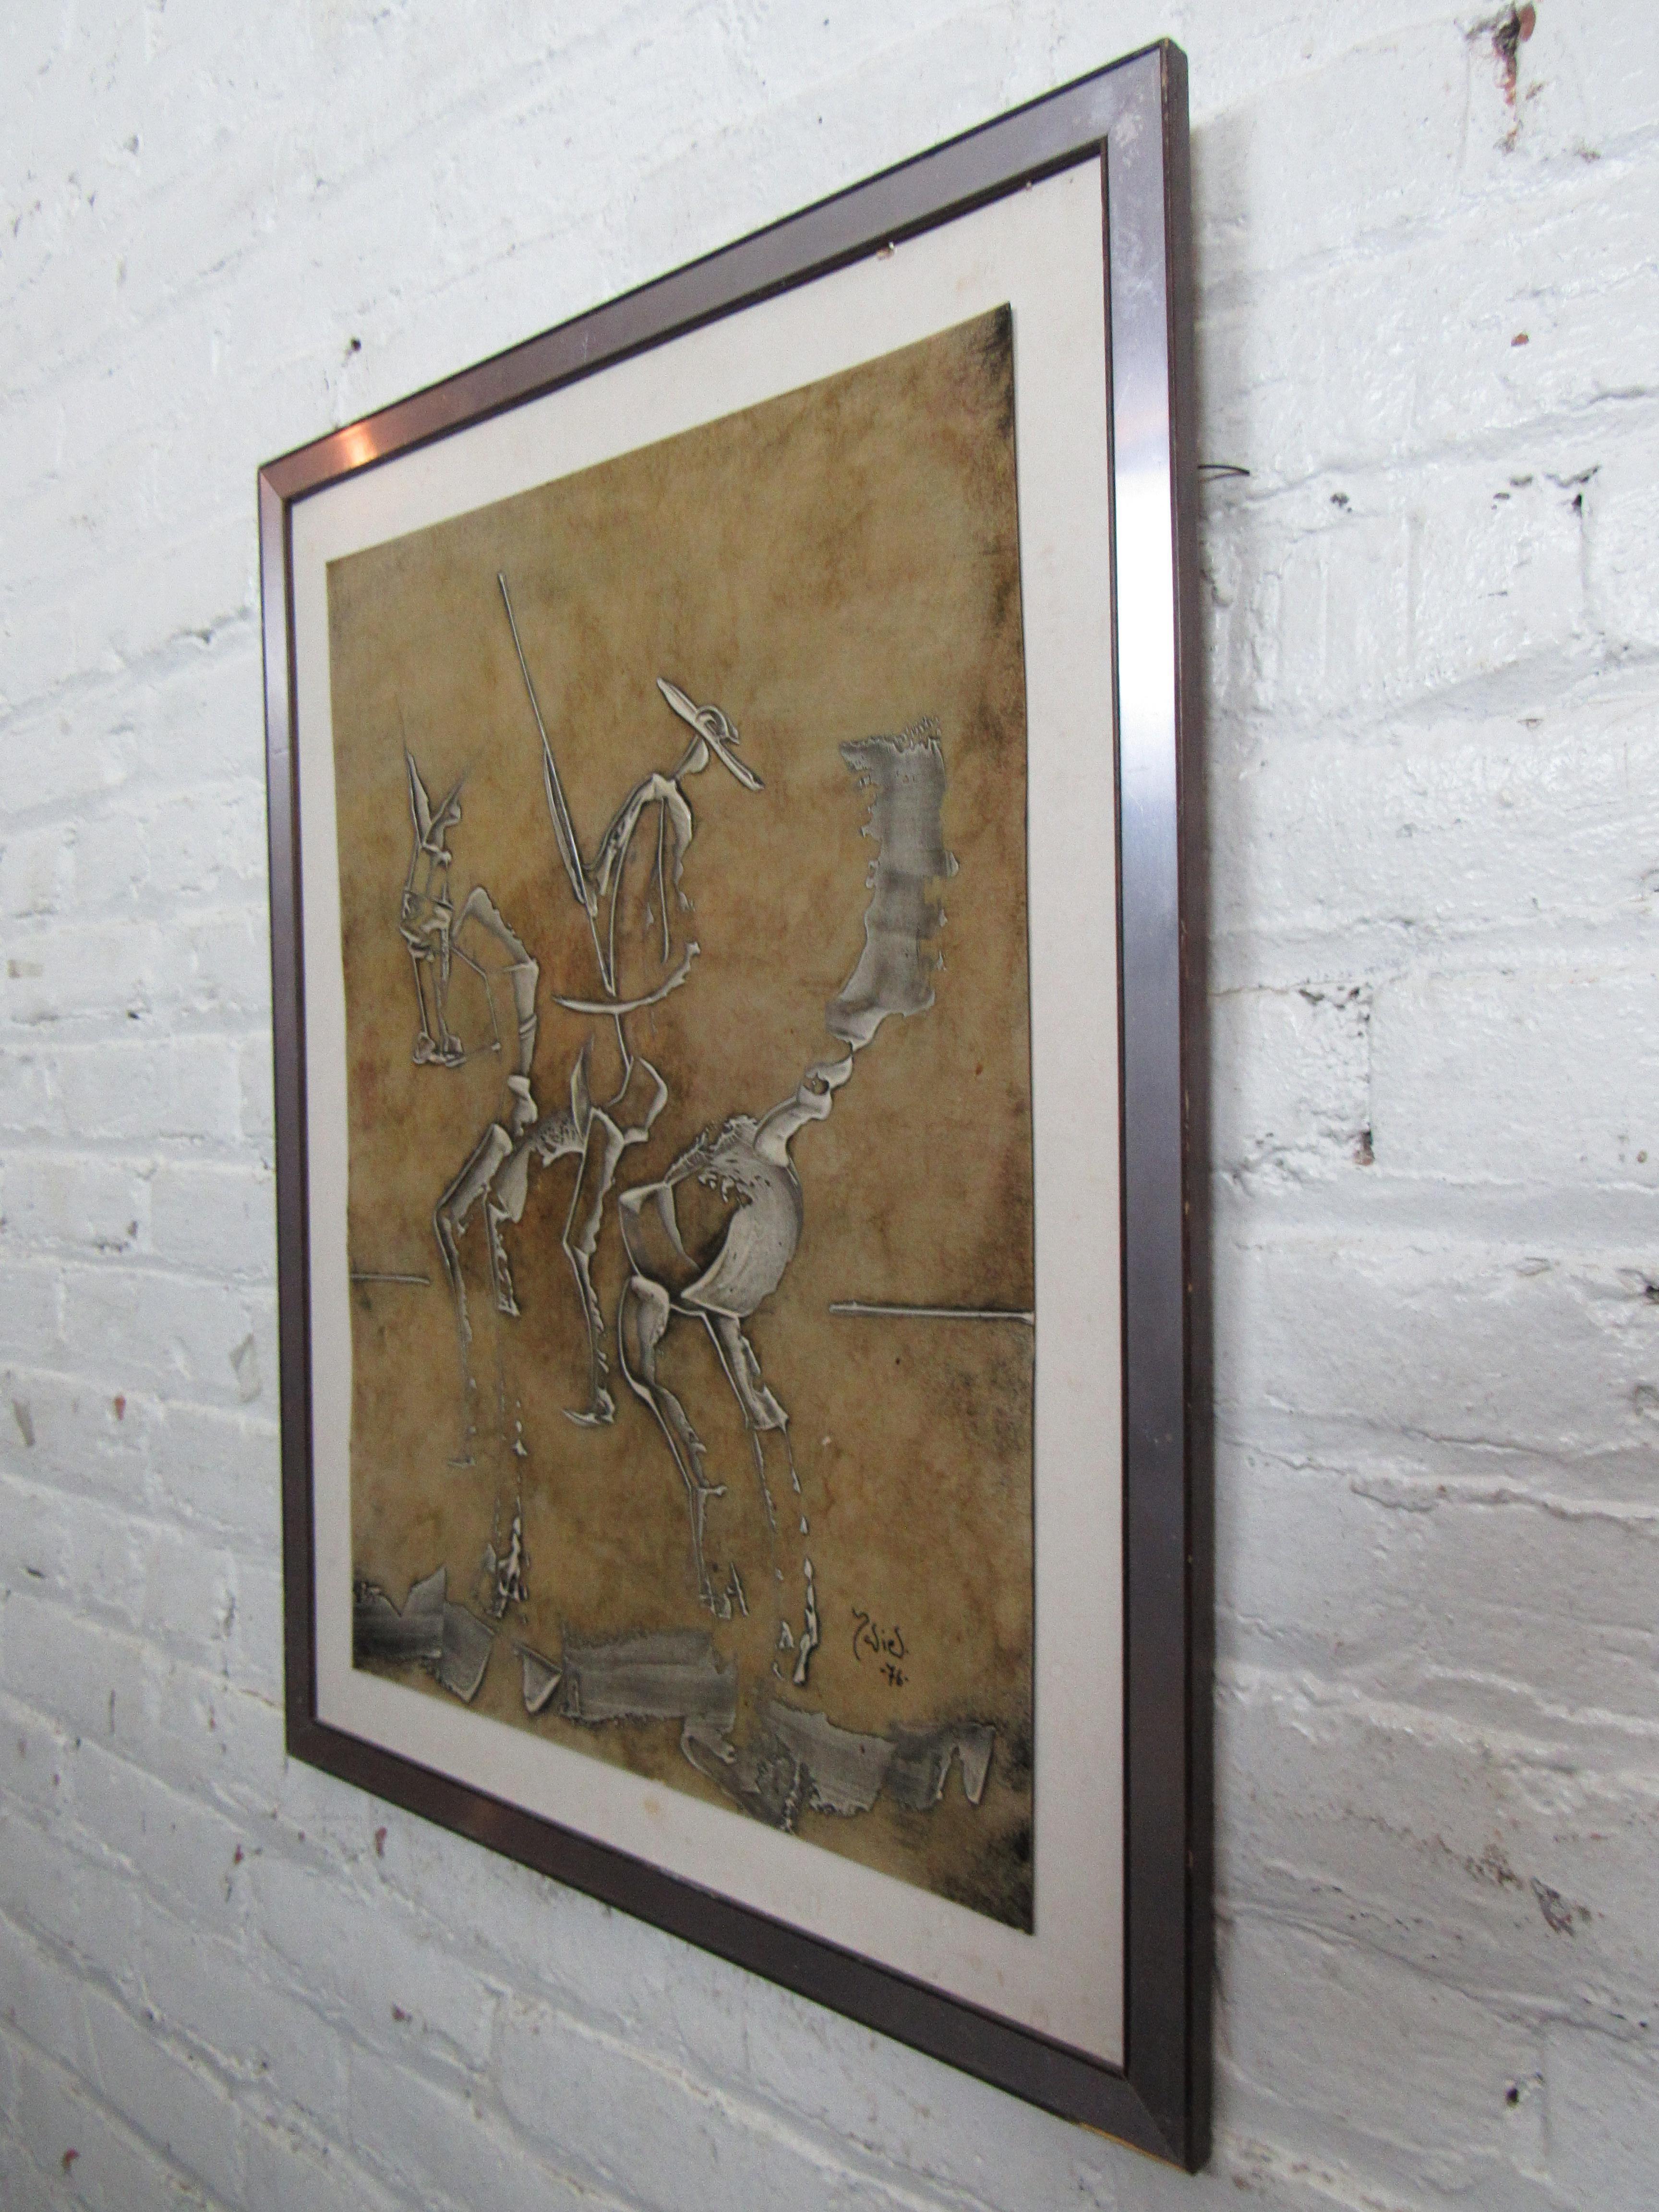 Held in a brushed metal frame and glass cover, this print of a Don Quixote-inspired artwork is signed by the artist and dated 1976. Please confirm item location with seller (NY/NJ).